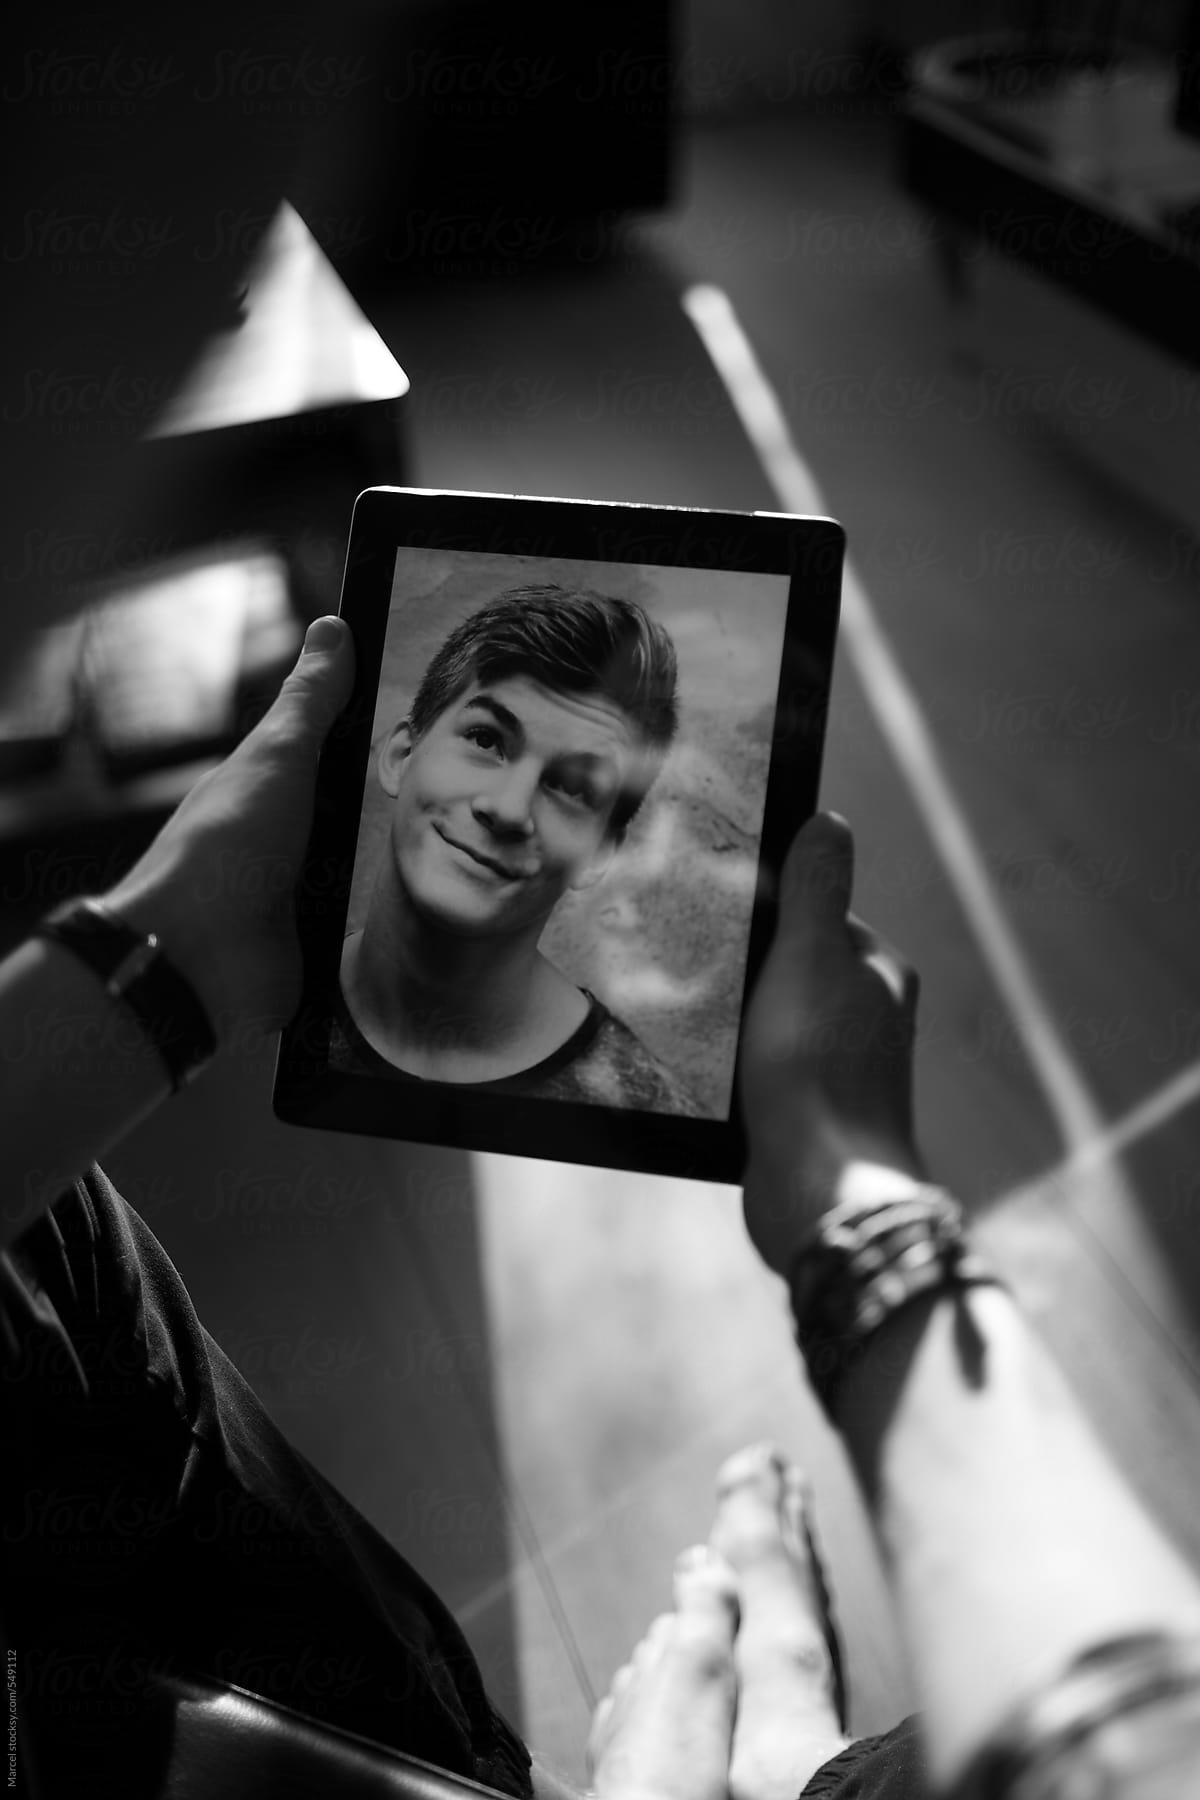 Teenage boy looking at a selfportrait on a tablet computer